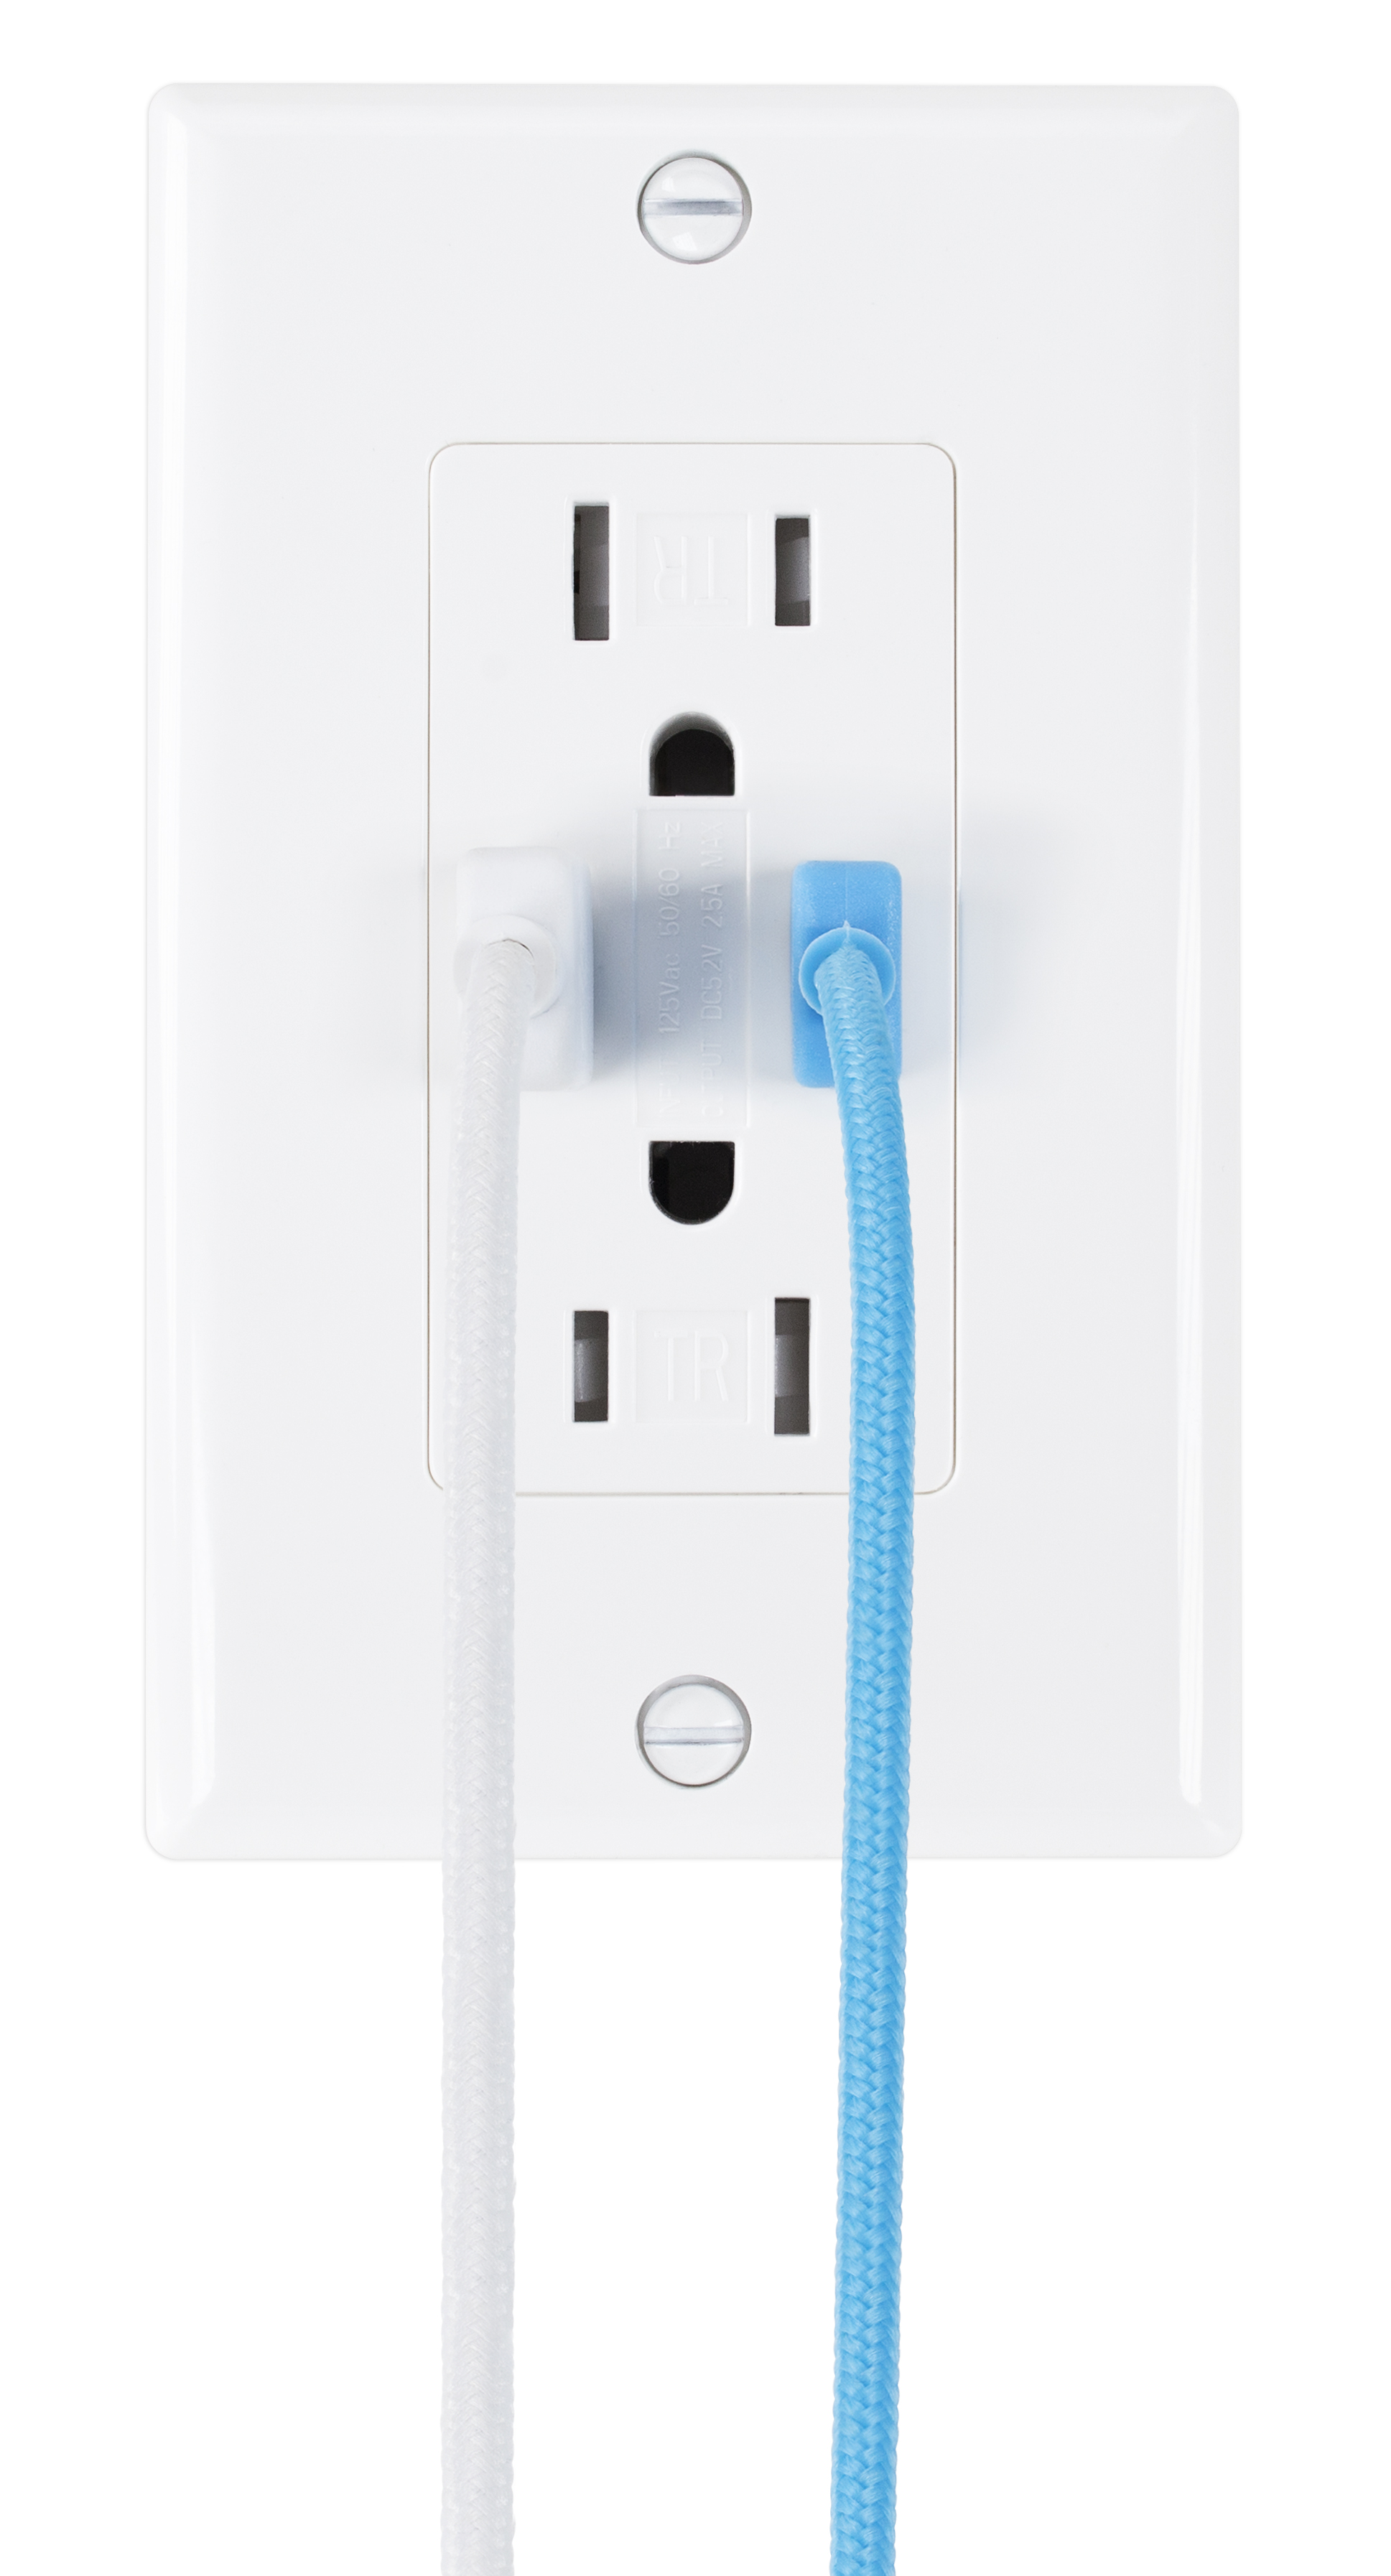 Next Generation NewerTech Power2U Outlet with Cables.jpg